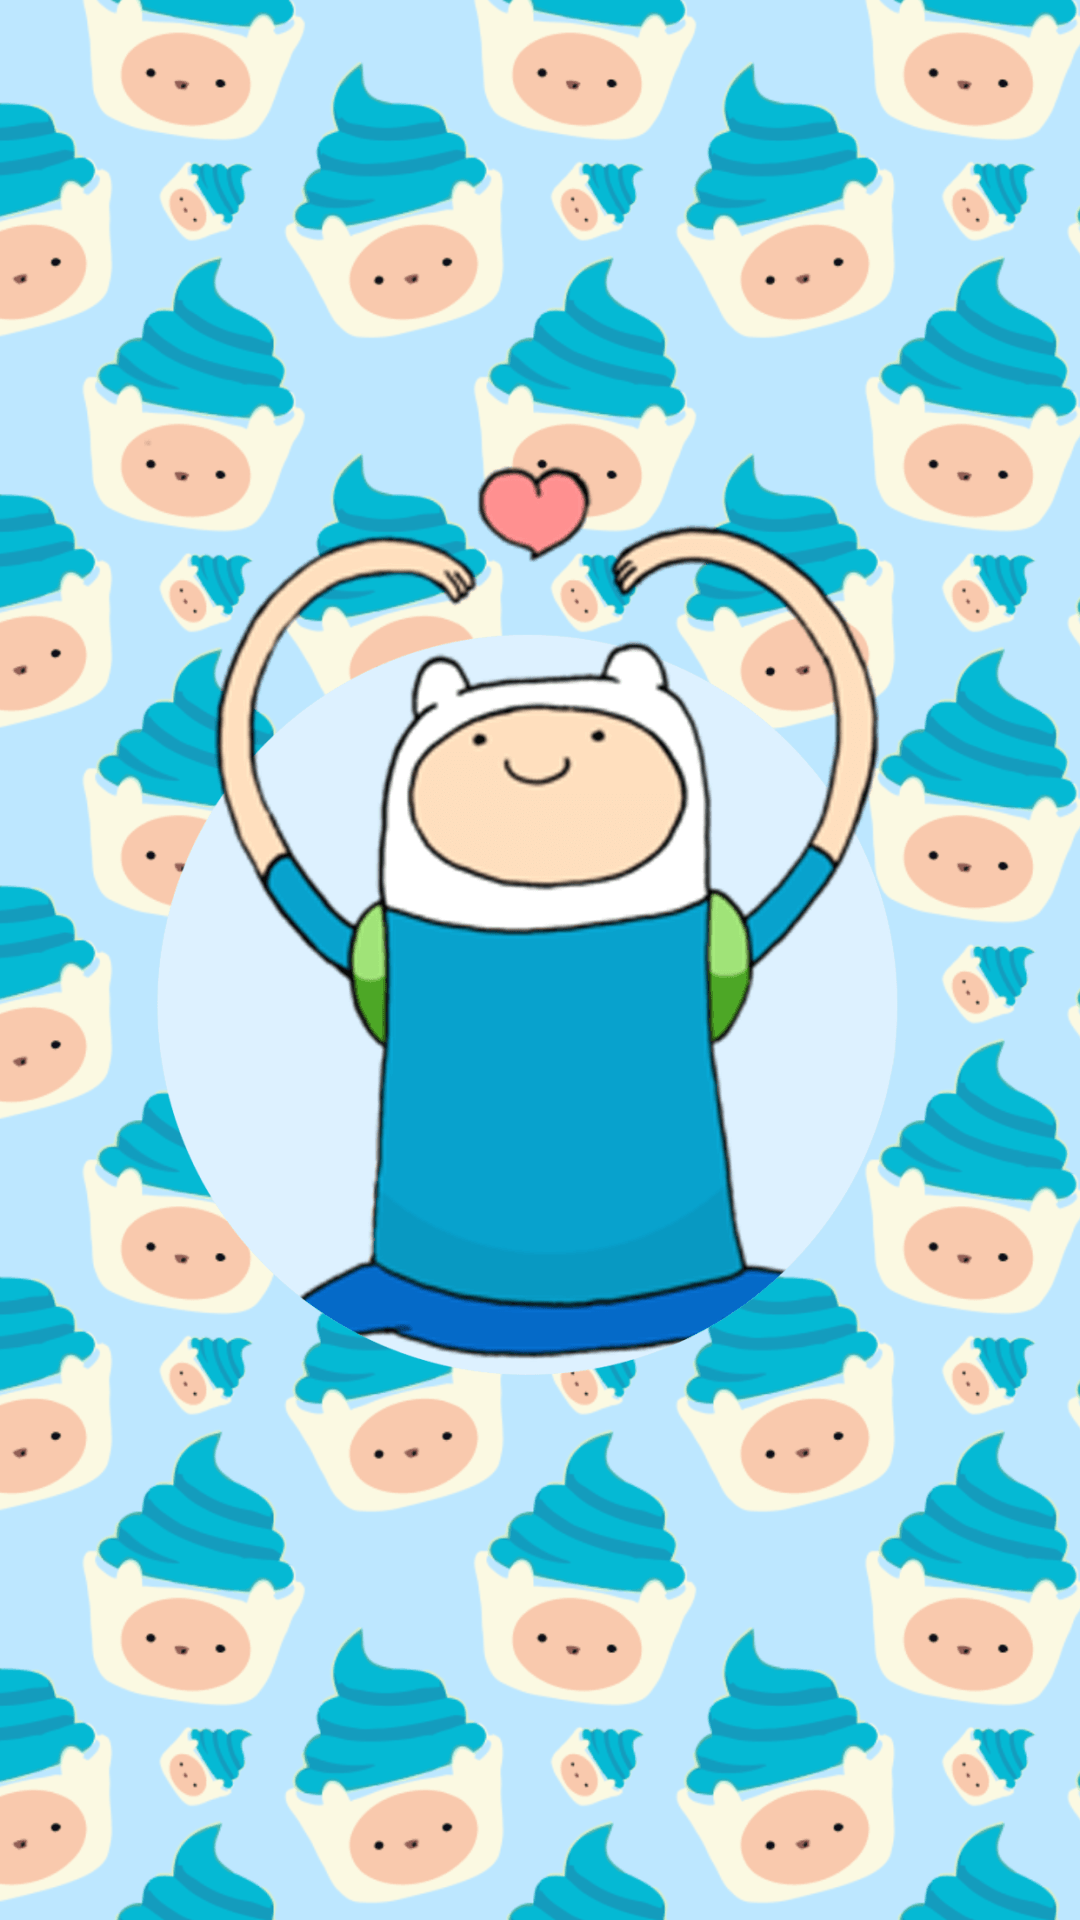 iphone wallpaper. ADVENTURE TIME!!! ☺♥♥♥ in 2019